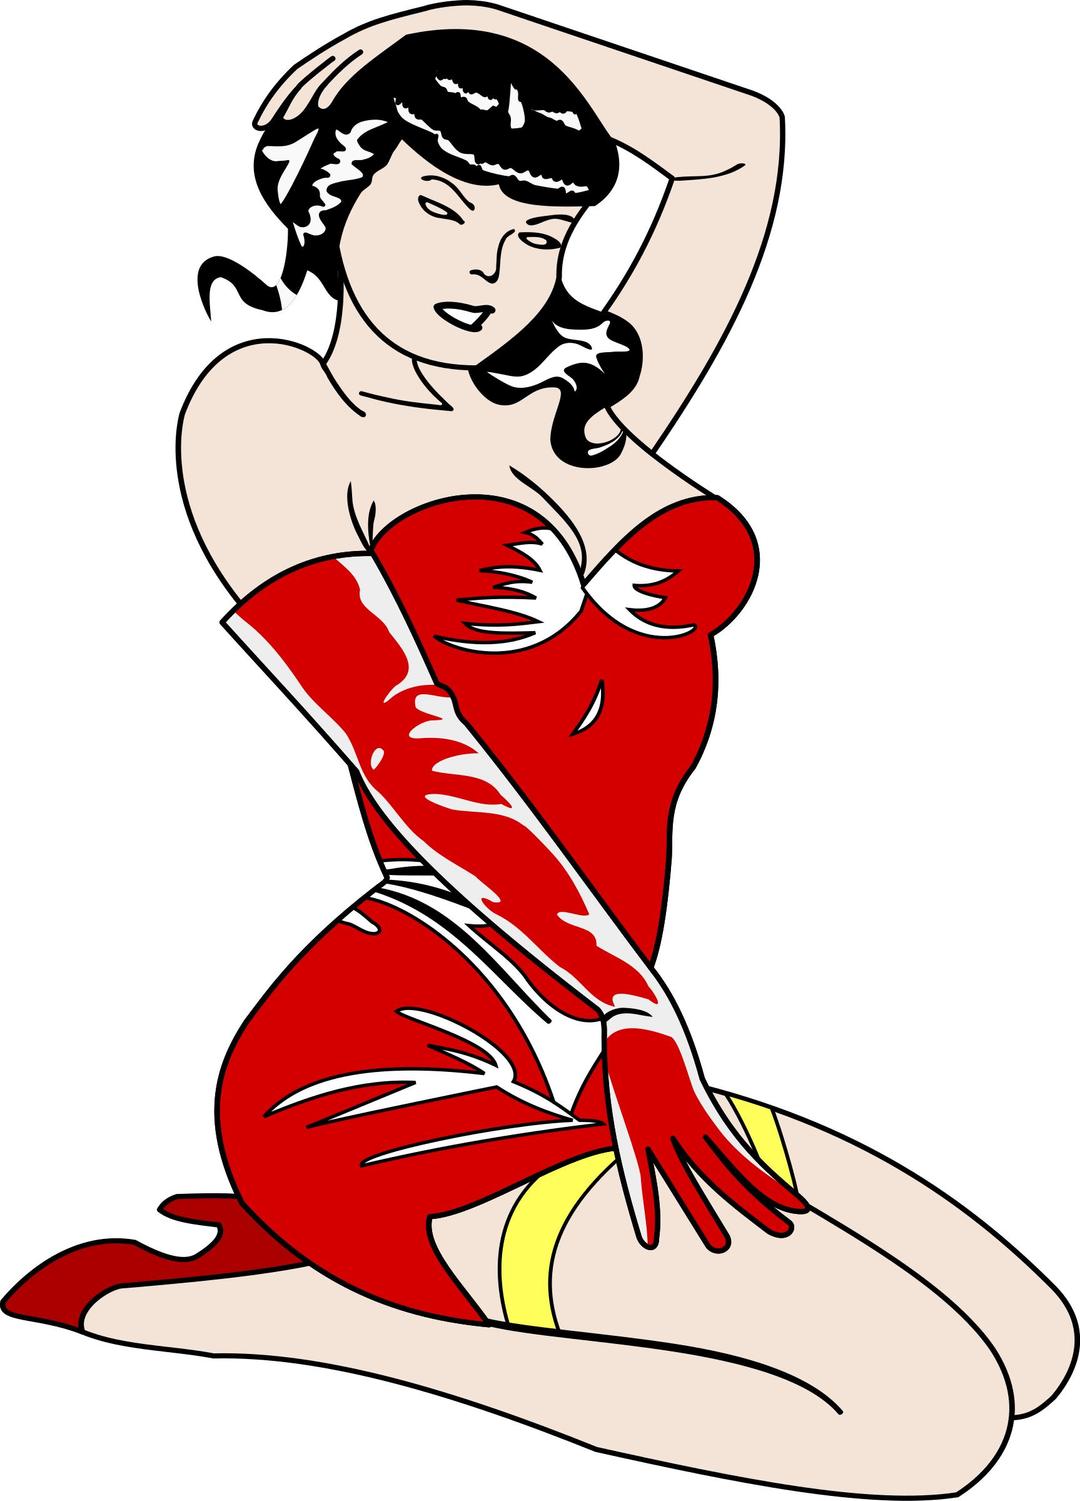 Old Style Pin-Up Girl png transparent